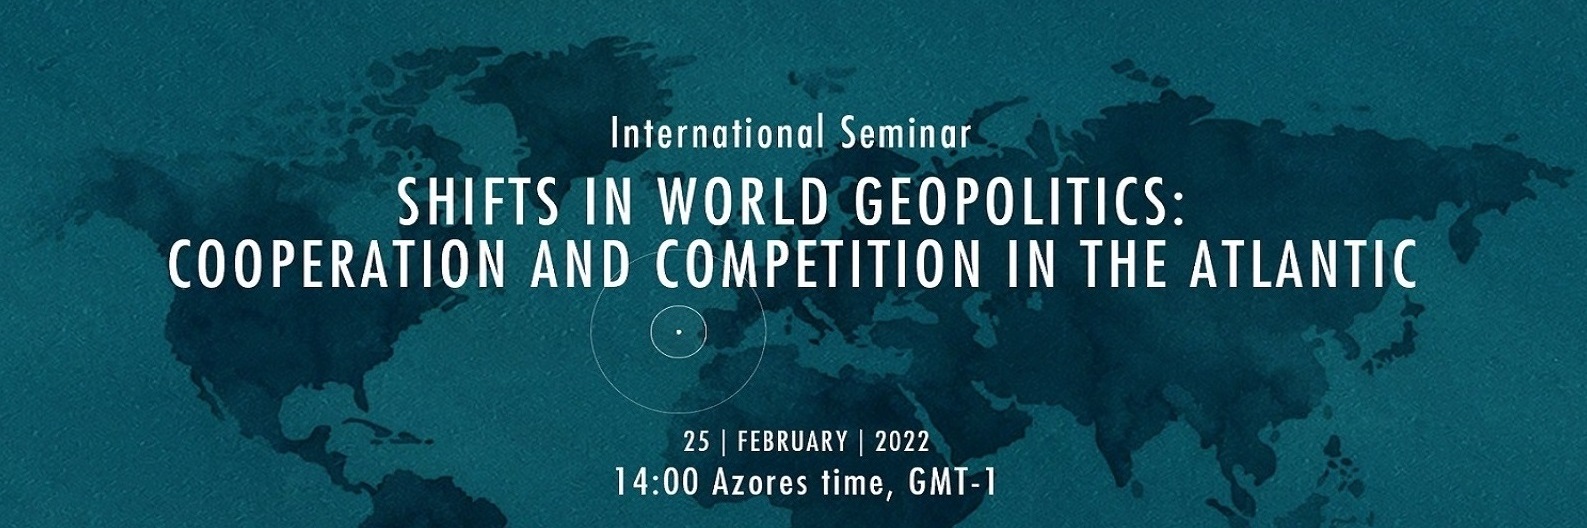 Seminário internacional “Shifts in world geopolitics: cooperation and competition in the Atlantic"